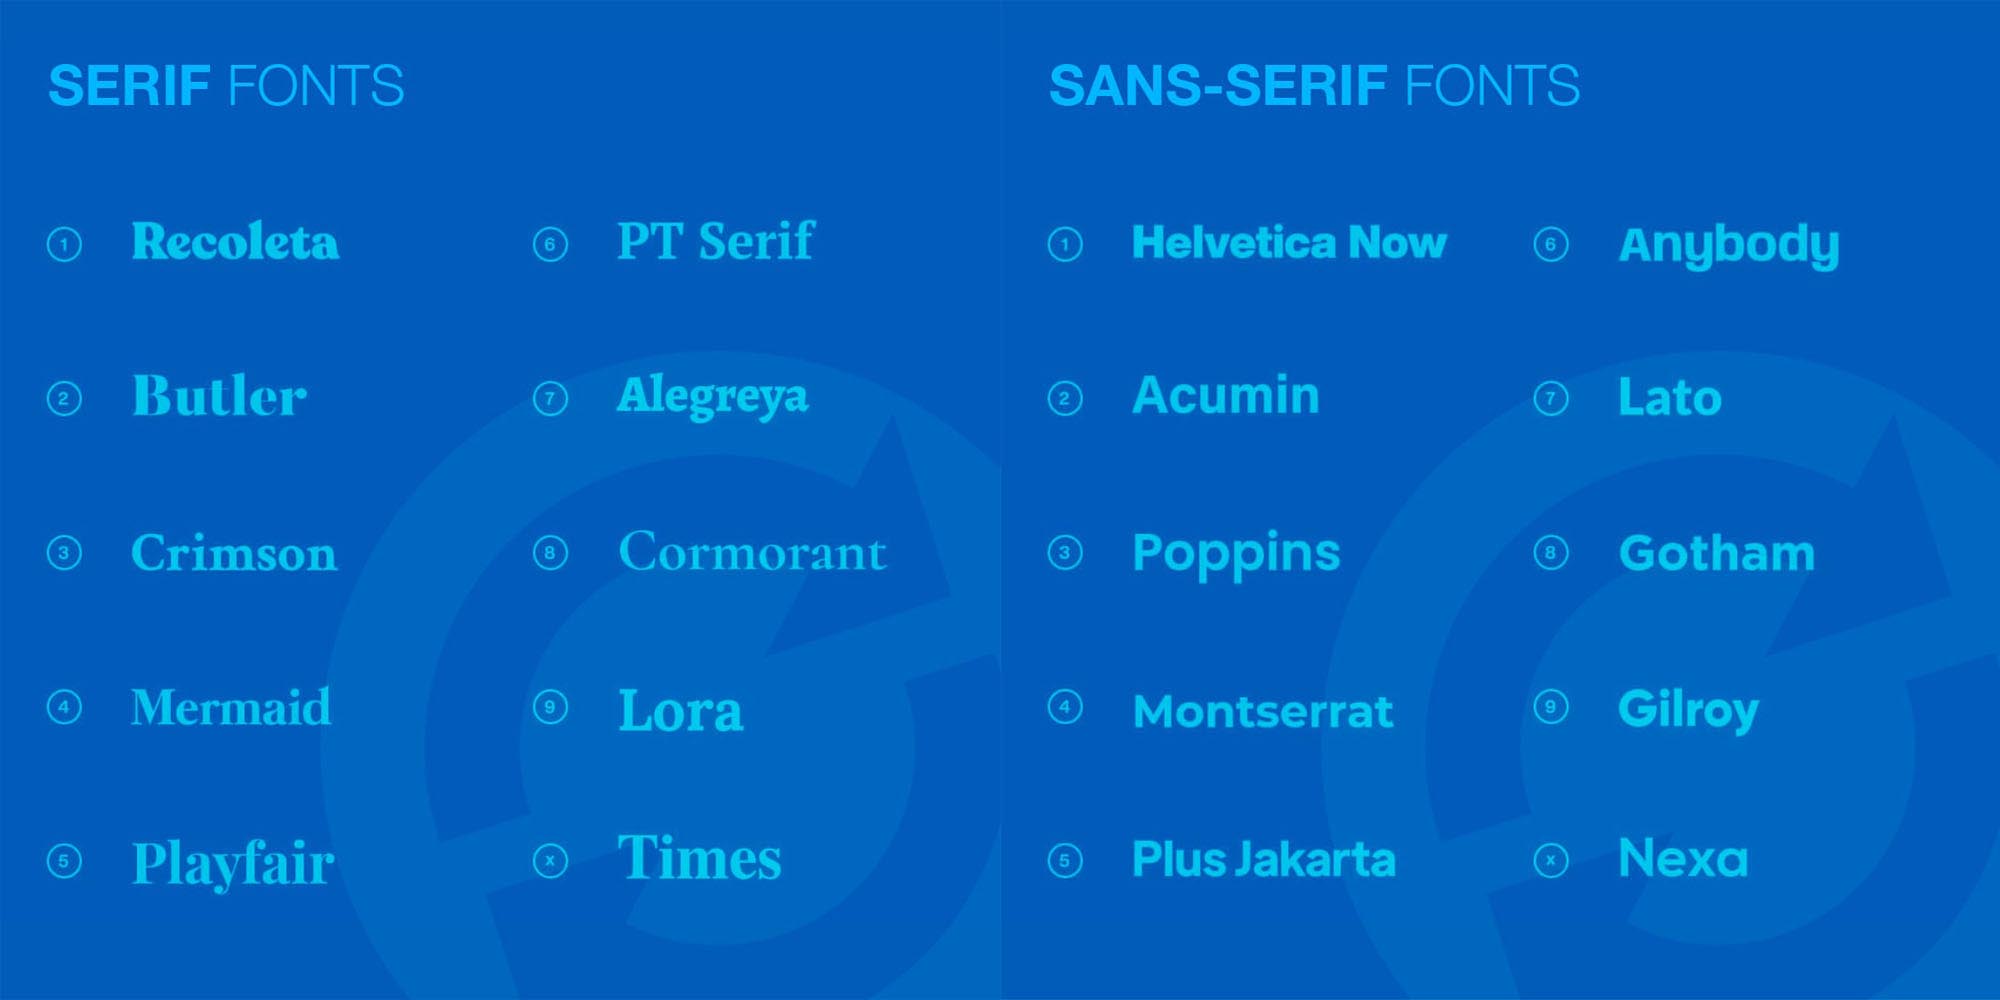 Getting to know your fonts...